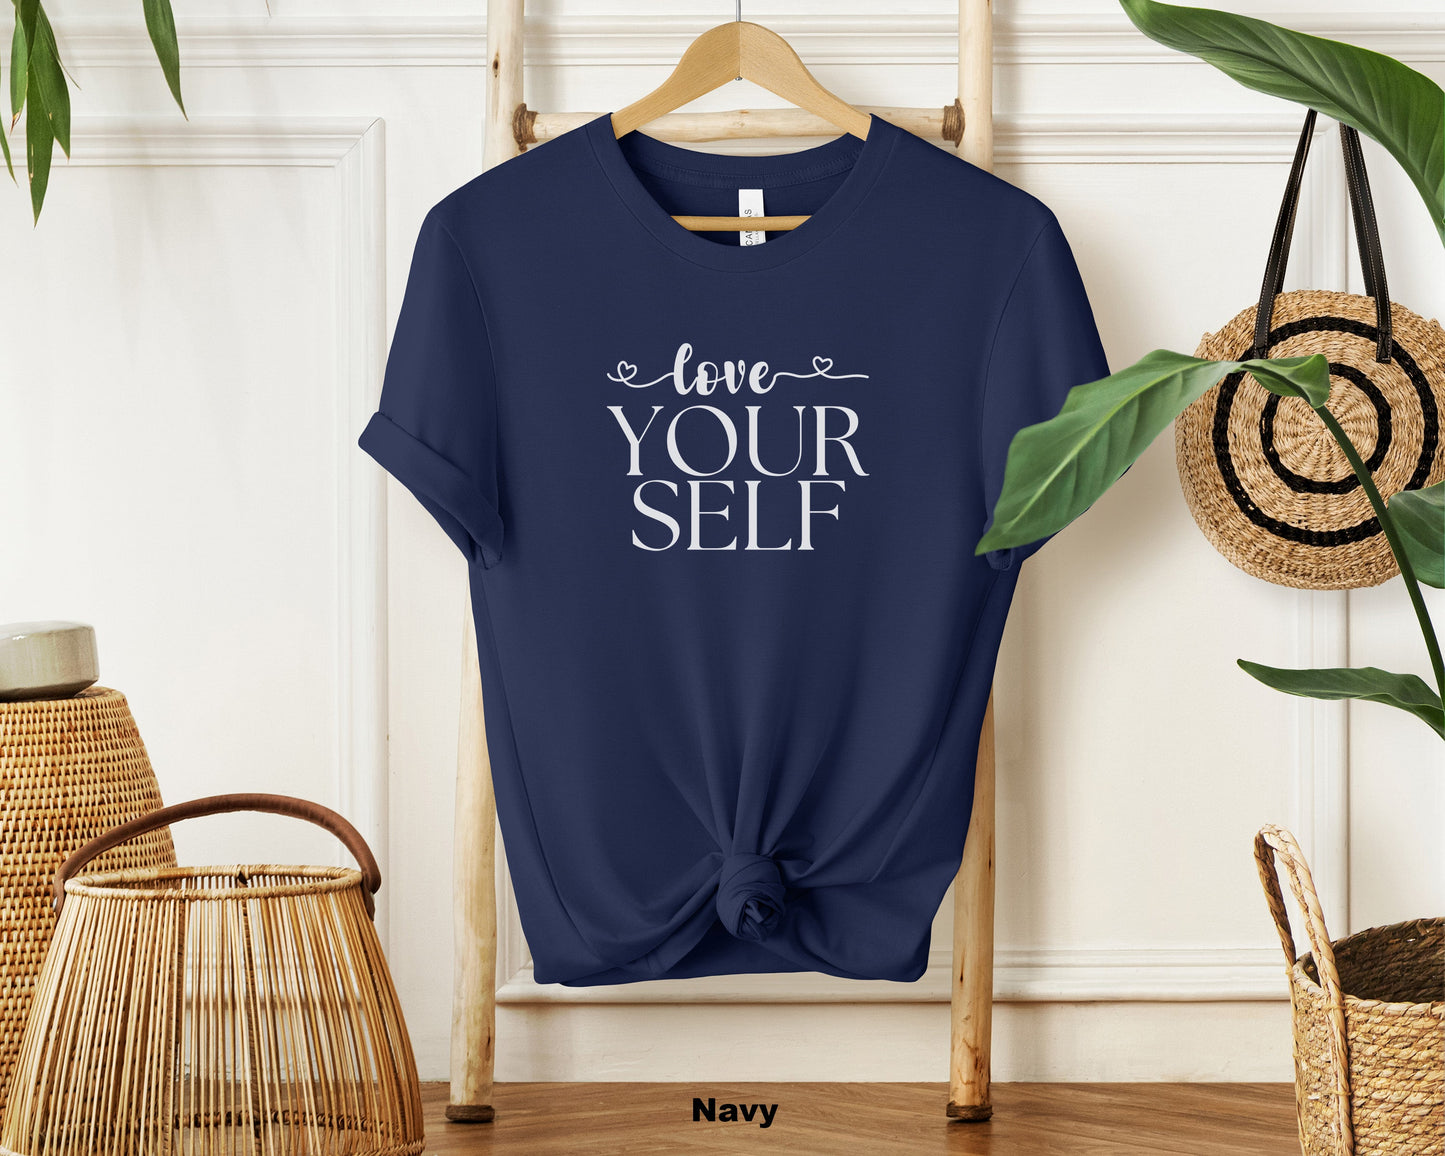 "Love Yourself Inspirational Classic Unisex Short Sleeve Crewneck T-Shirt in Soft Cotton Material"